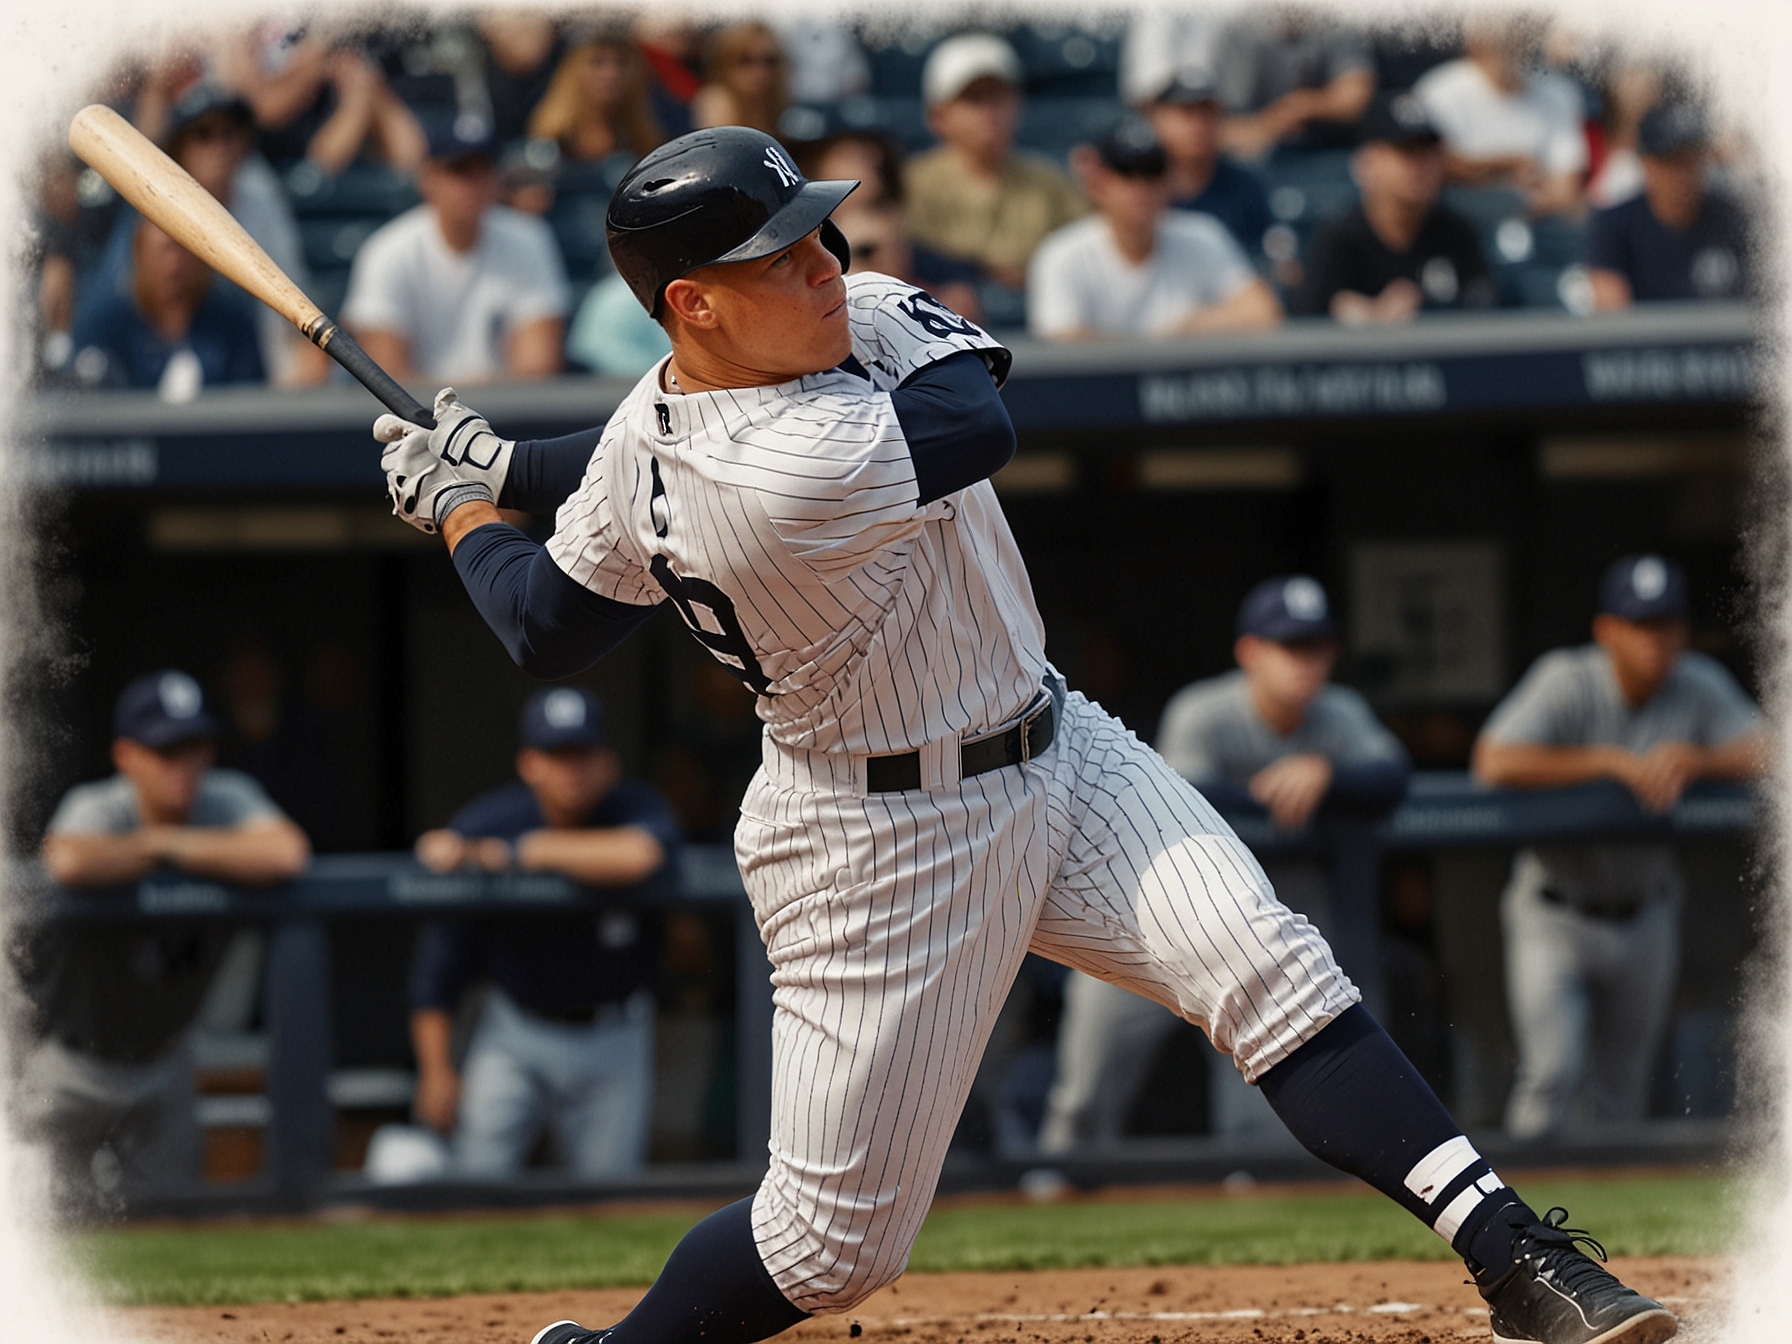 Aaron Judge in his Yankees uniform, delivering a powerful swing at the plate, highlighting his home run prowess - emphasizing the physical demands of his role and why he is skipping the Derby.